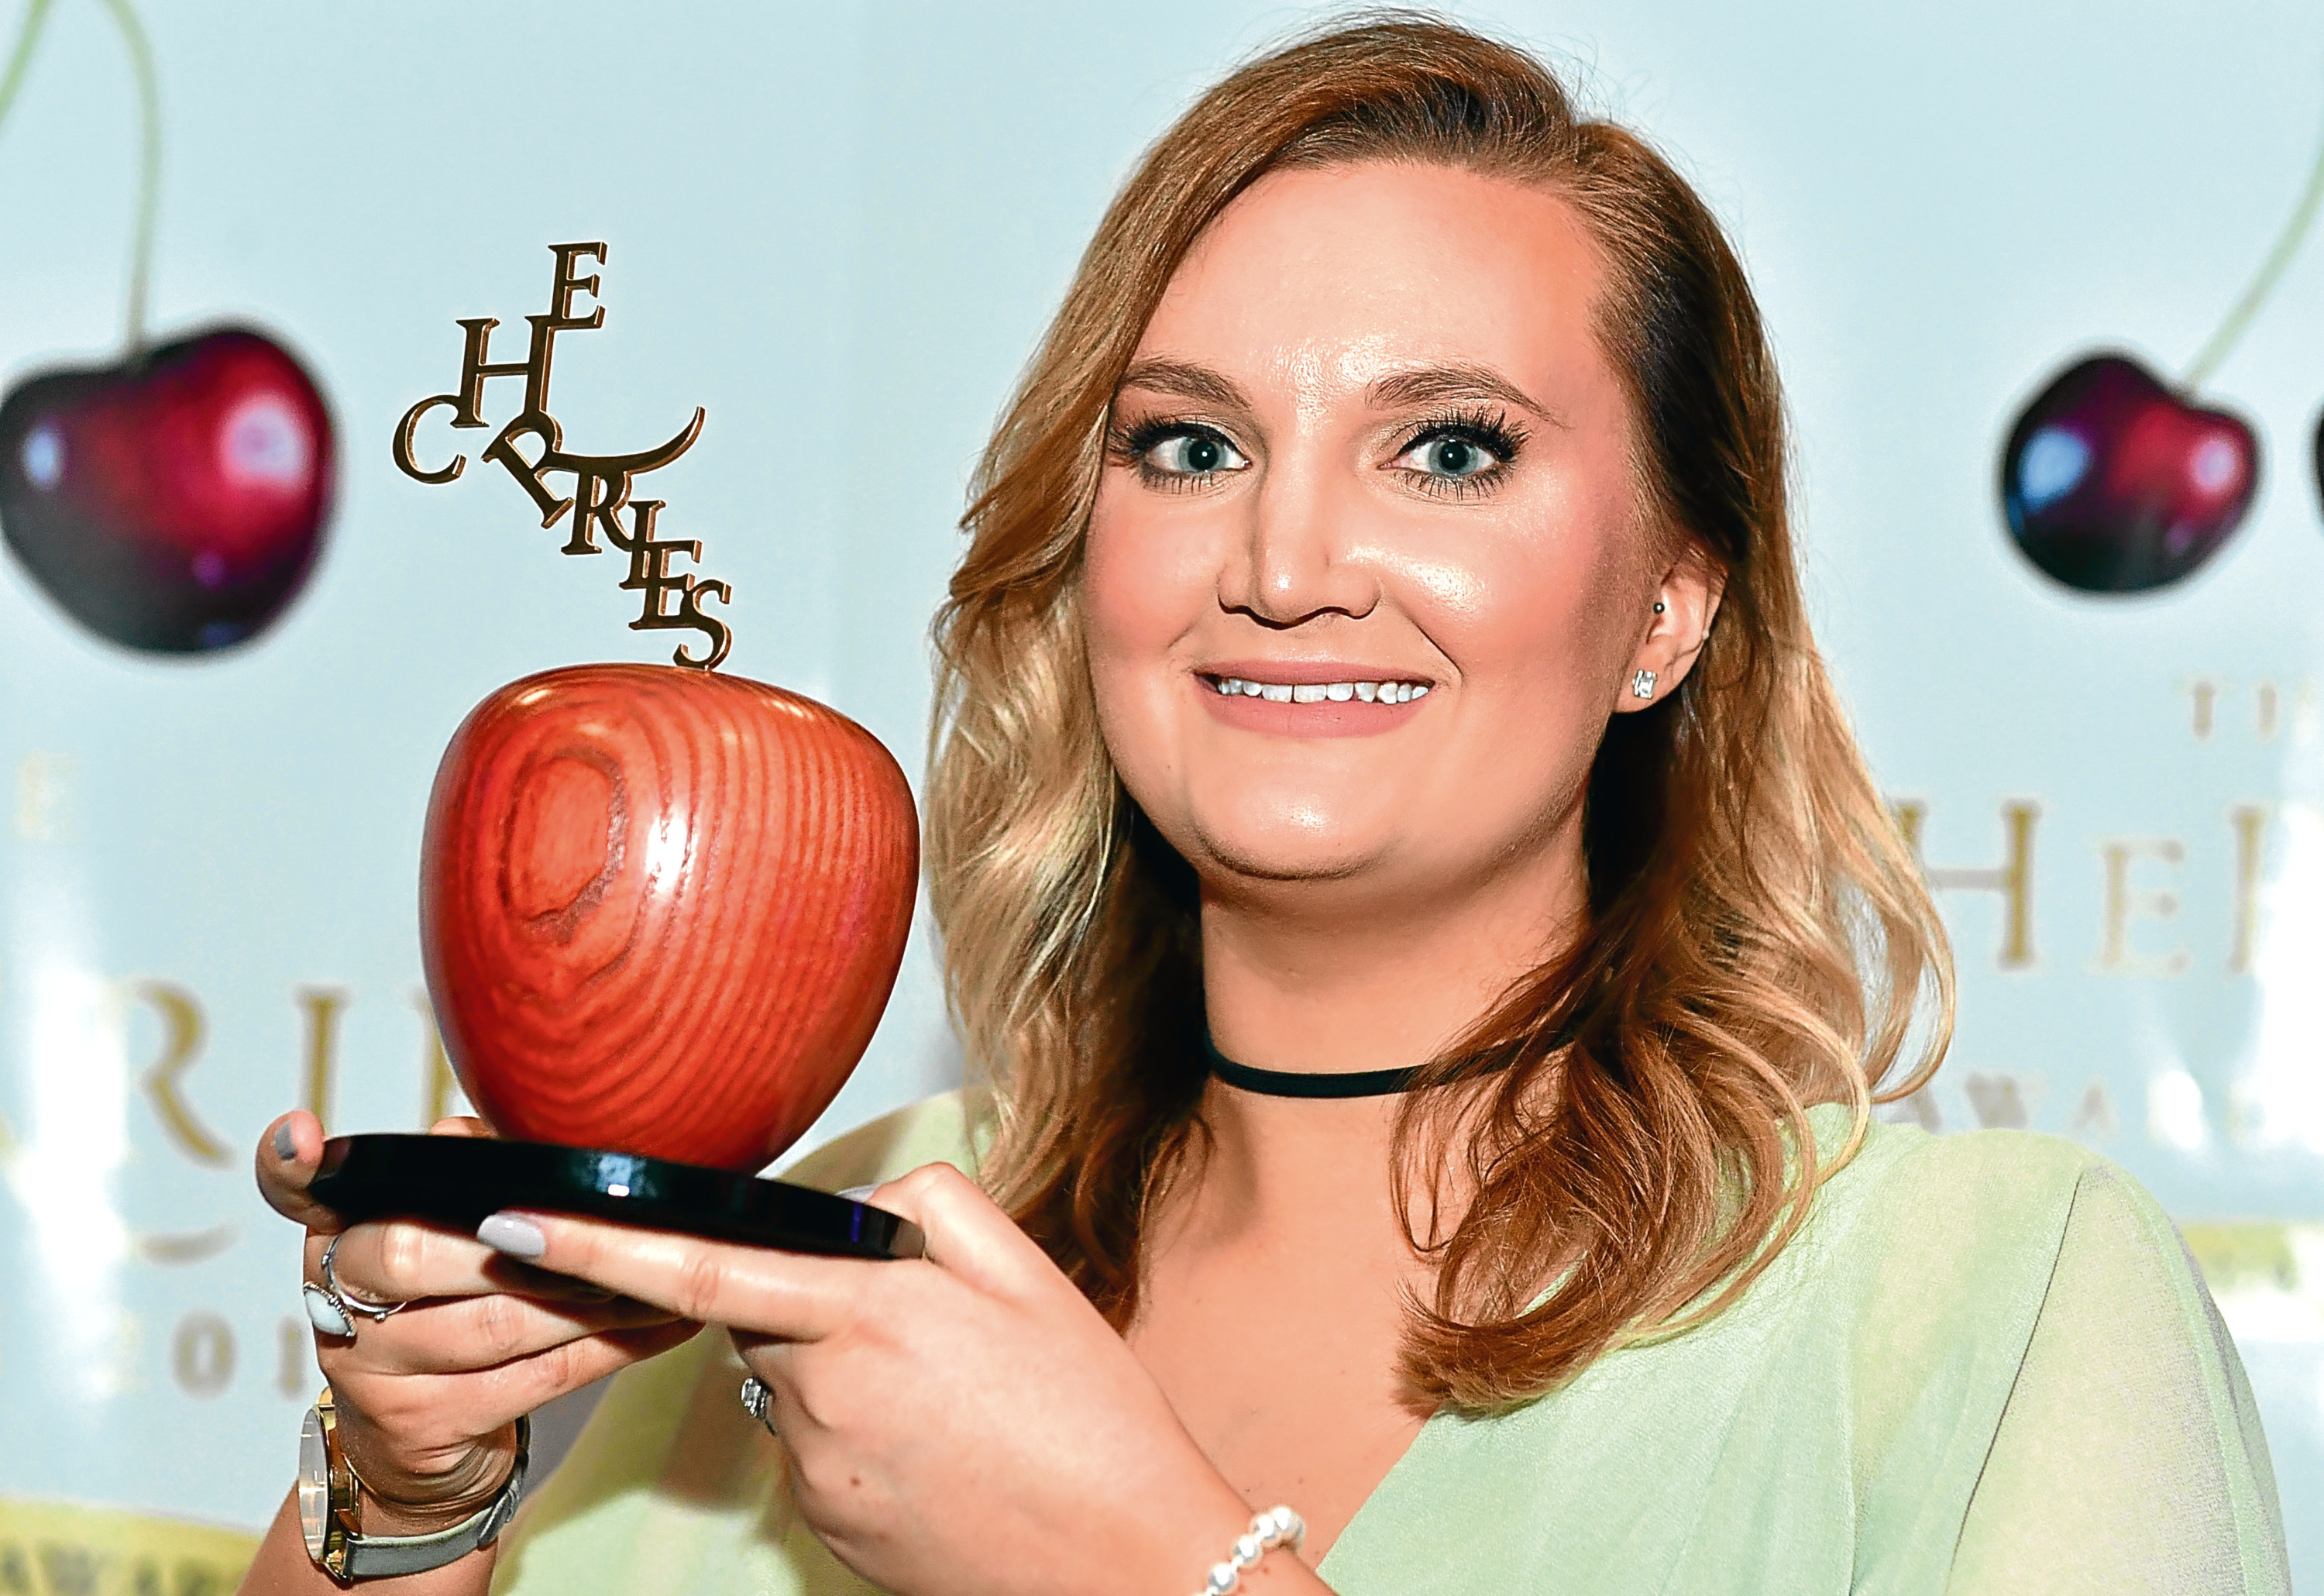 cHerRies Awards 2017 at the AECC.    

Awards ; 

Pictured - The Blossoming Award - Winner - Emily Duffield of TAQA Bratani Ltd.    

by Kami Thomson    01-06-17